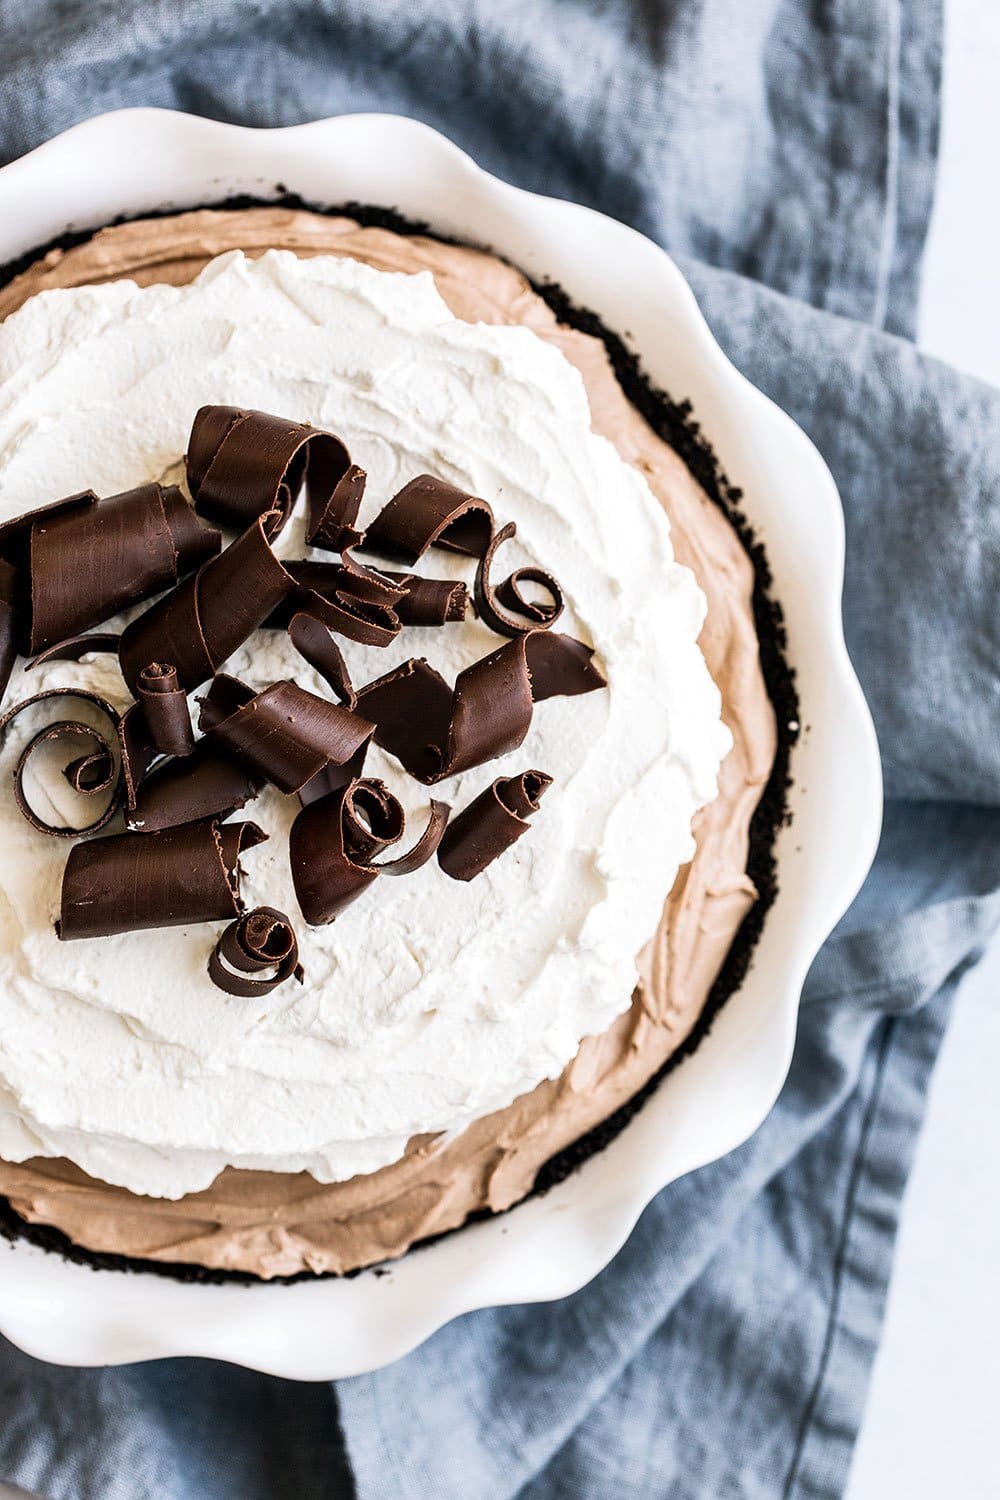 Classic Chocolate Silk Pie made with NO raw eggs - just tons of silky rich chocolate goodness!